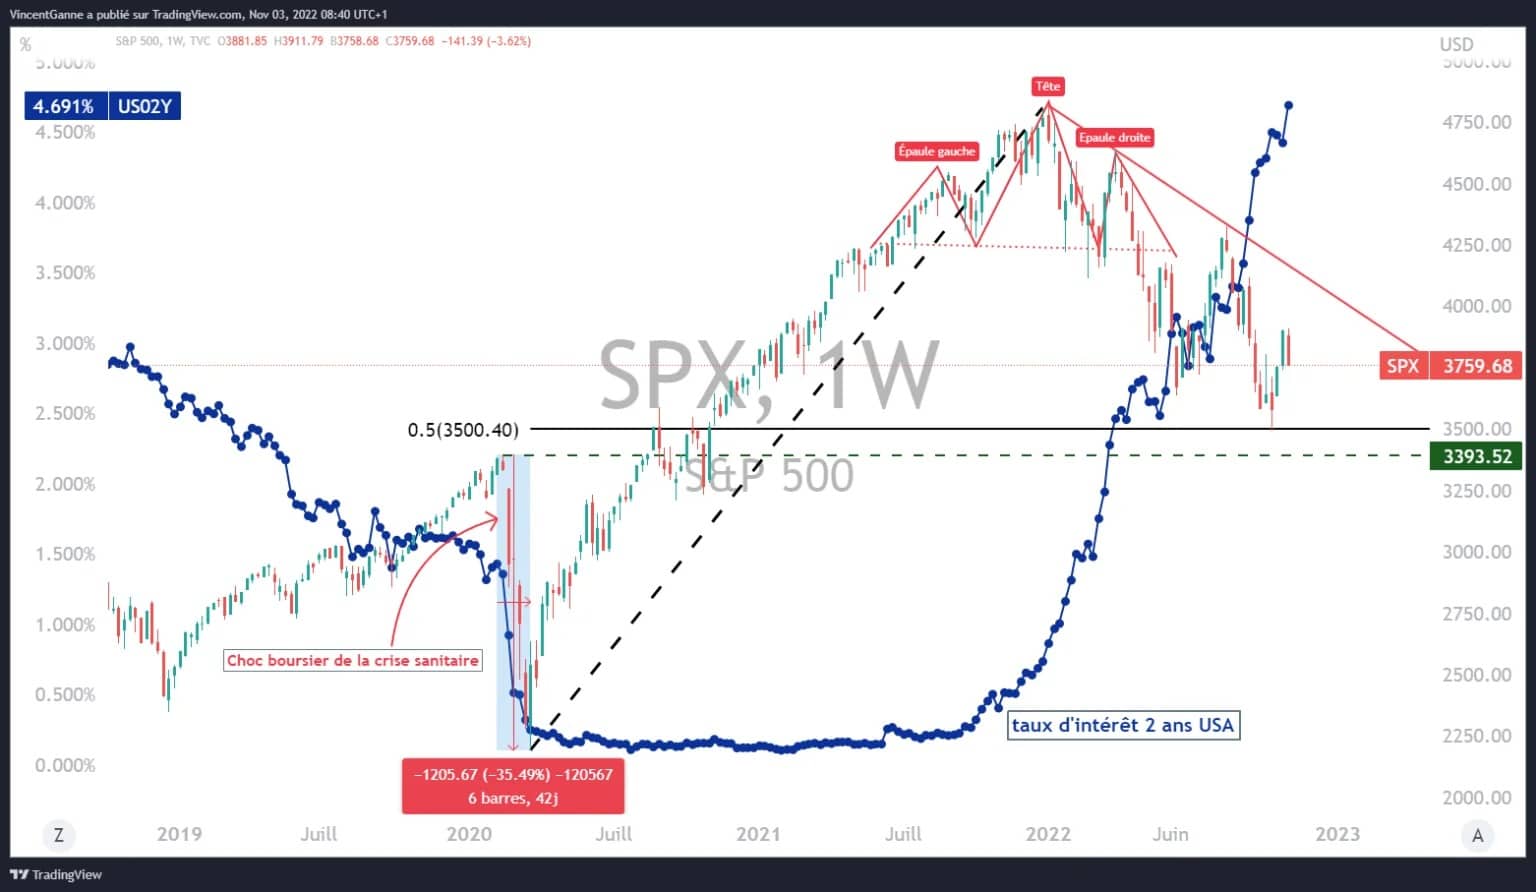 Weekly evolution of the S&P500 index and the US 2-year bond rate (in blue)